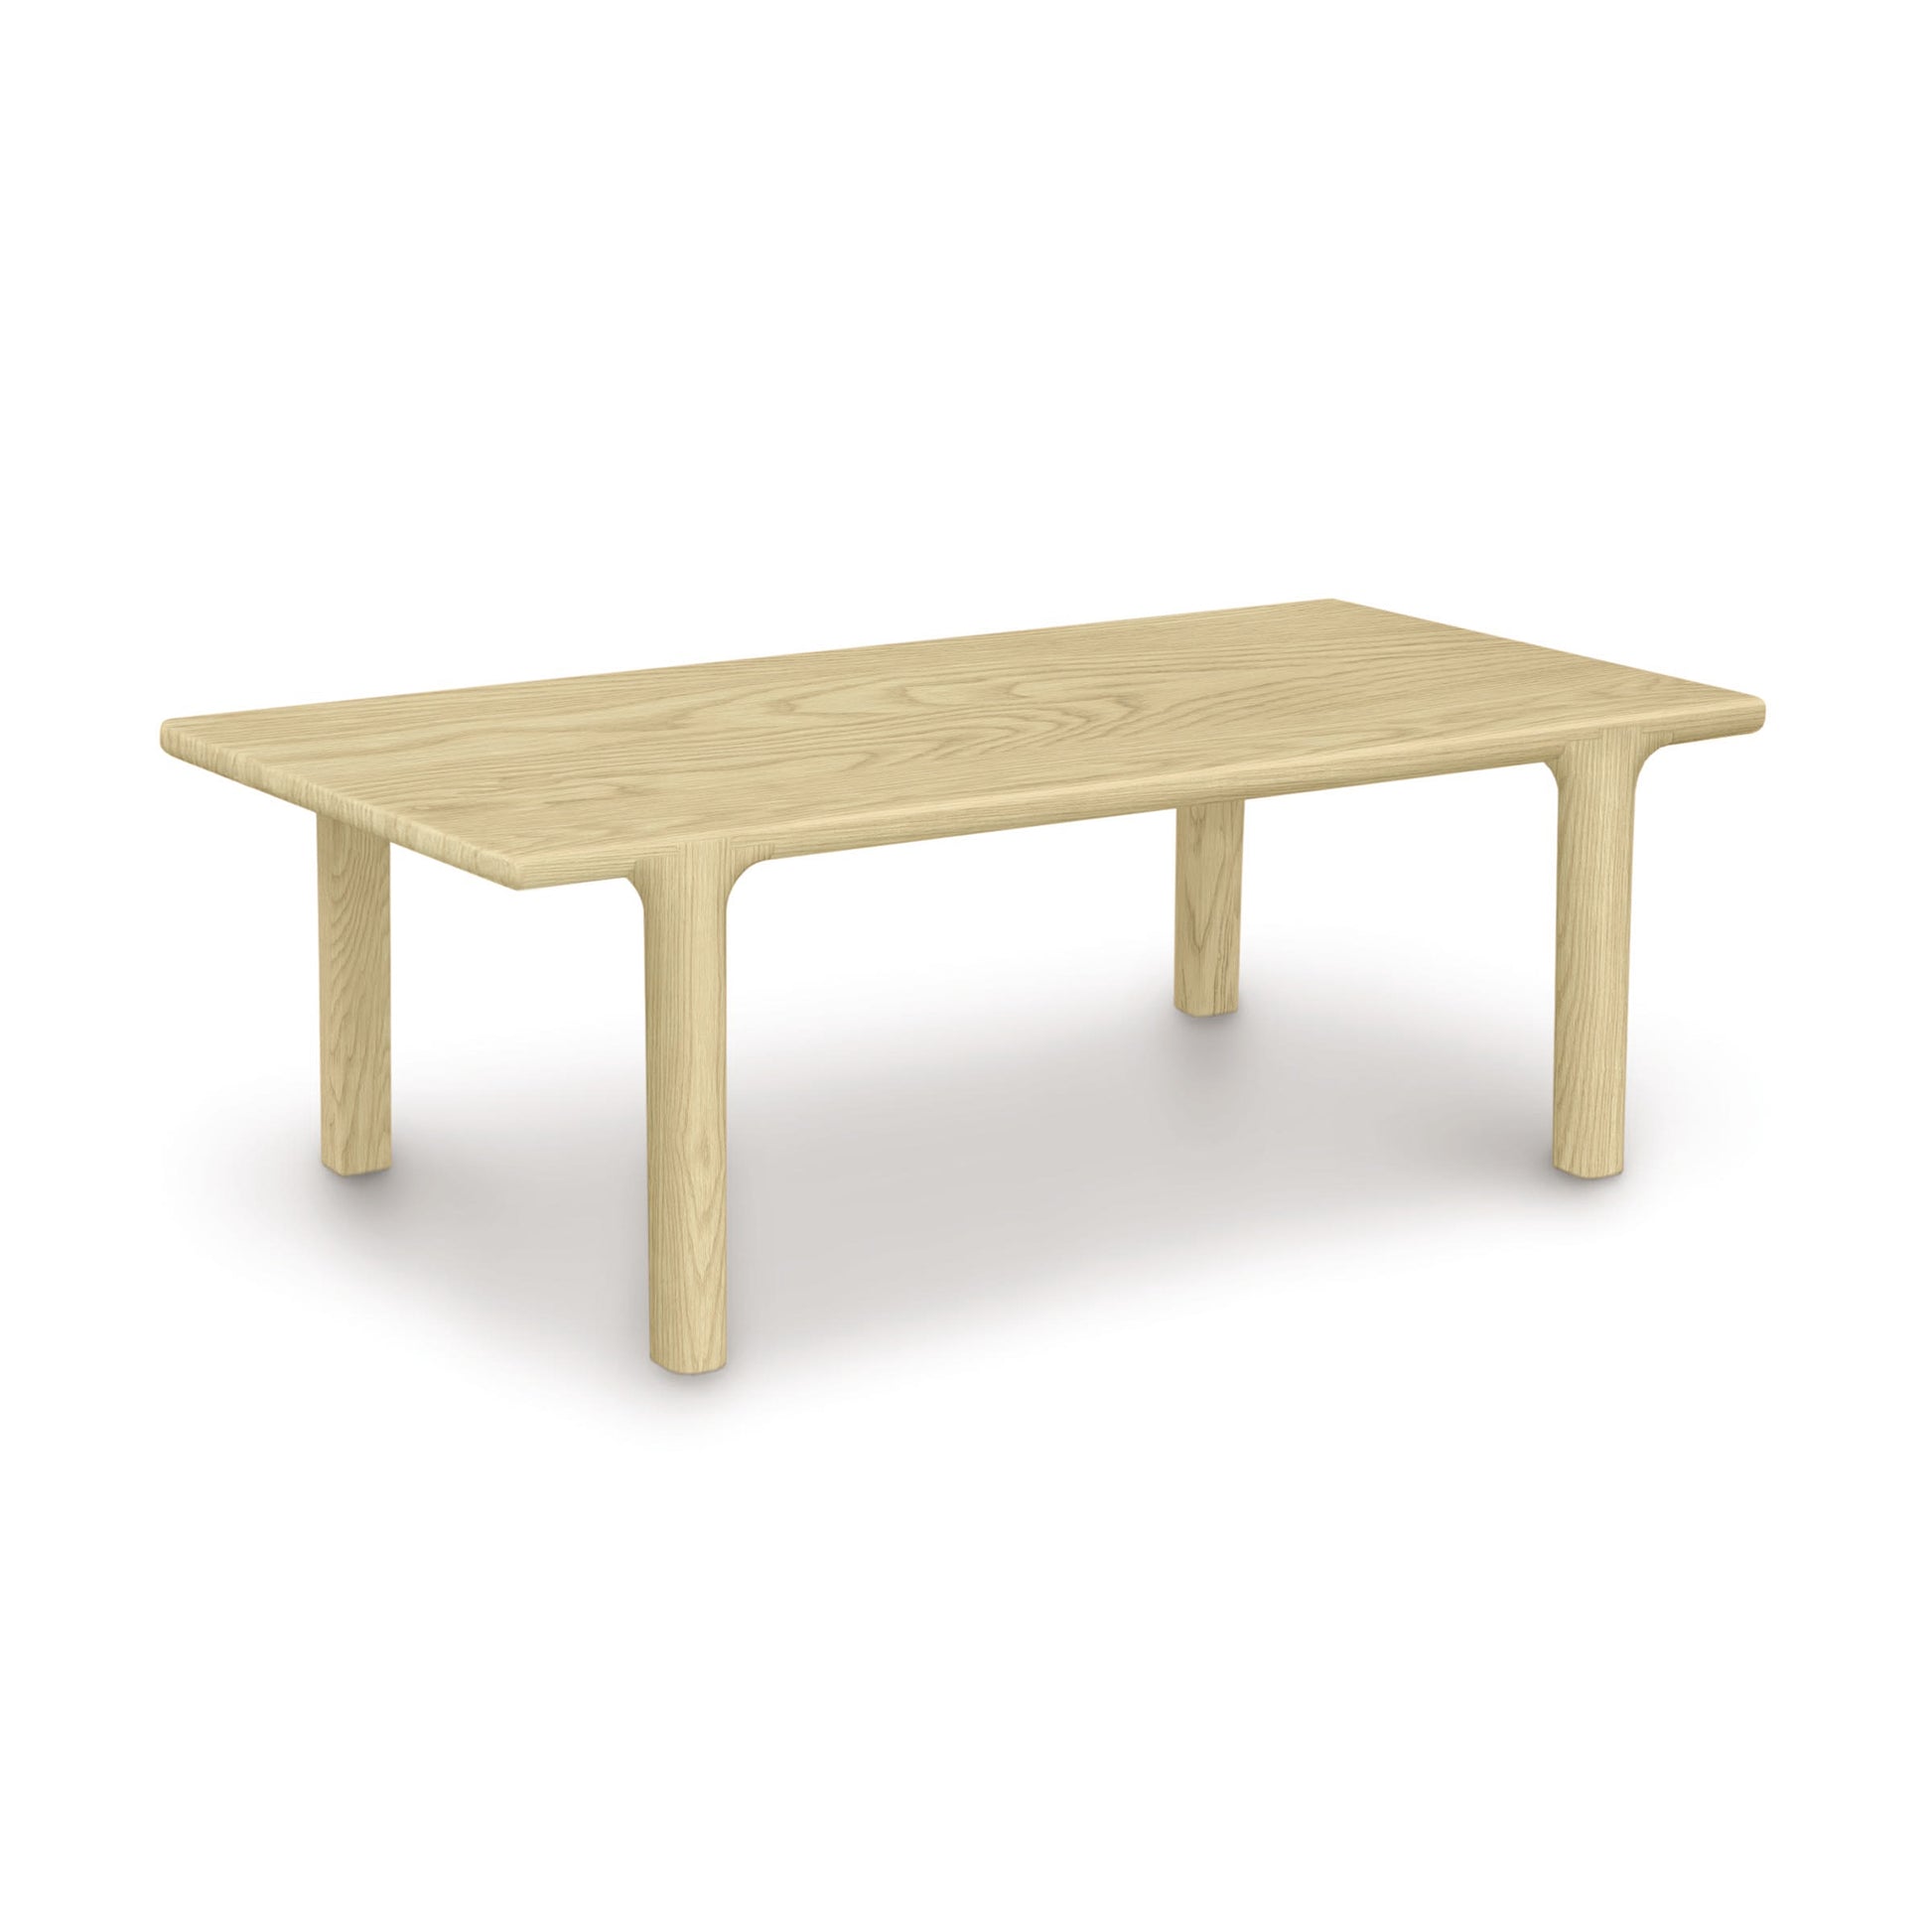 A contemporary wooden table, the Copeland Furniture Sierra Rectangular Coffee Table, showcased on a white background.